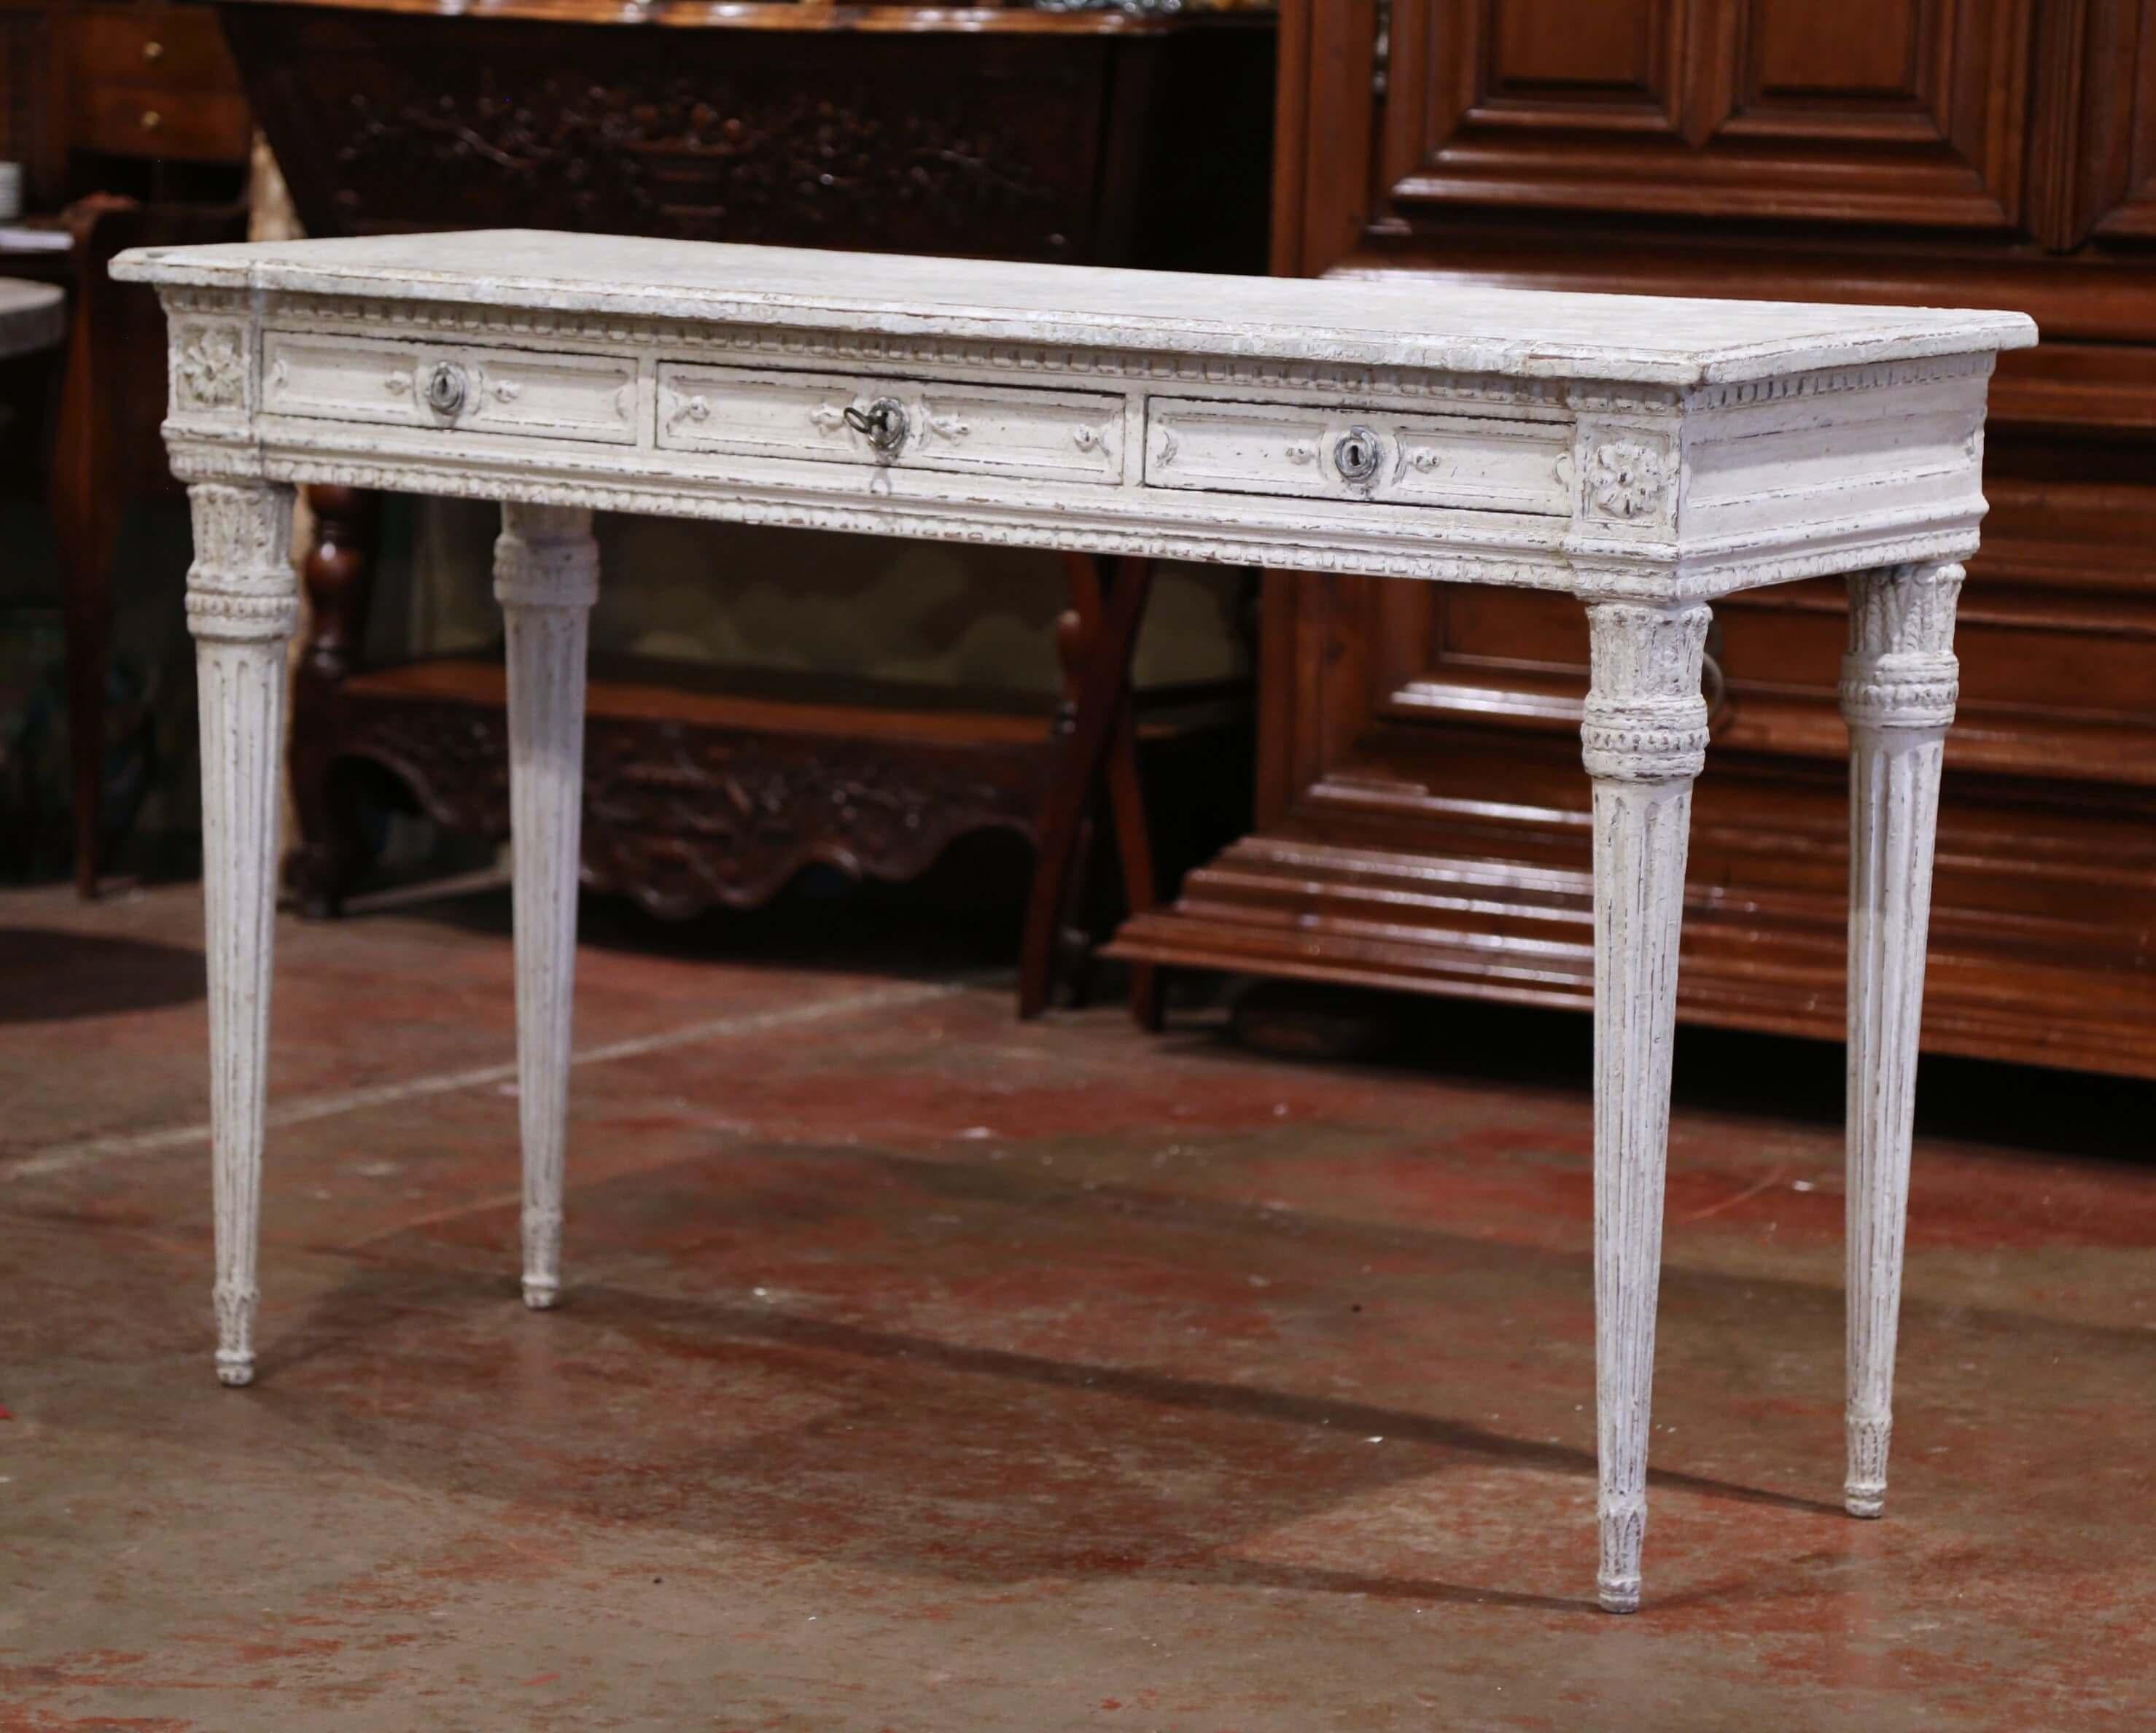 This elegant antique console was created in France, circa 1870. The grey painted table sits on carved and tapered legs over a carved apron embellished with floral medallions on each corner. The console features three drawers across the front dressed